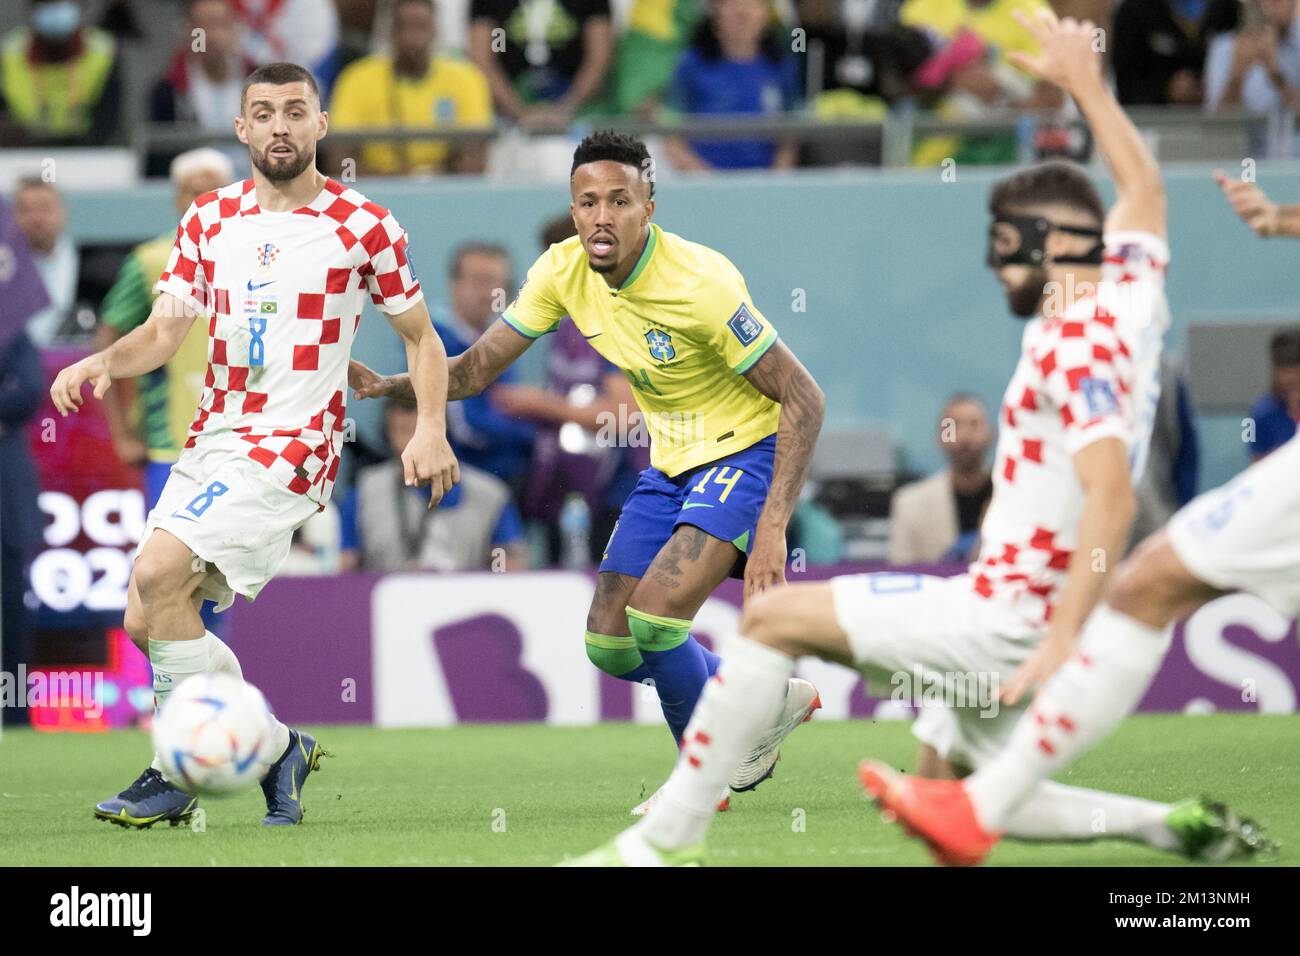 Doha, Qatar. 10th Dec, 2022. Eder Militao of Brazil and Mateo Kovacic of Croatia in action during the FIFA World Cup Qatar 2022 quarter final match between Croatia and Brazil at Education City Stadium on December 09, 2022 in Doha, Qatar. Photo by David Niviere/ABACAPRESS.COM Credit: Abaca Press/Alamy Live News Stock Photo